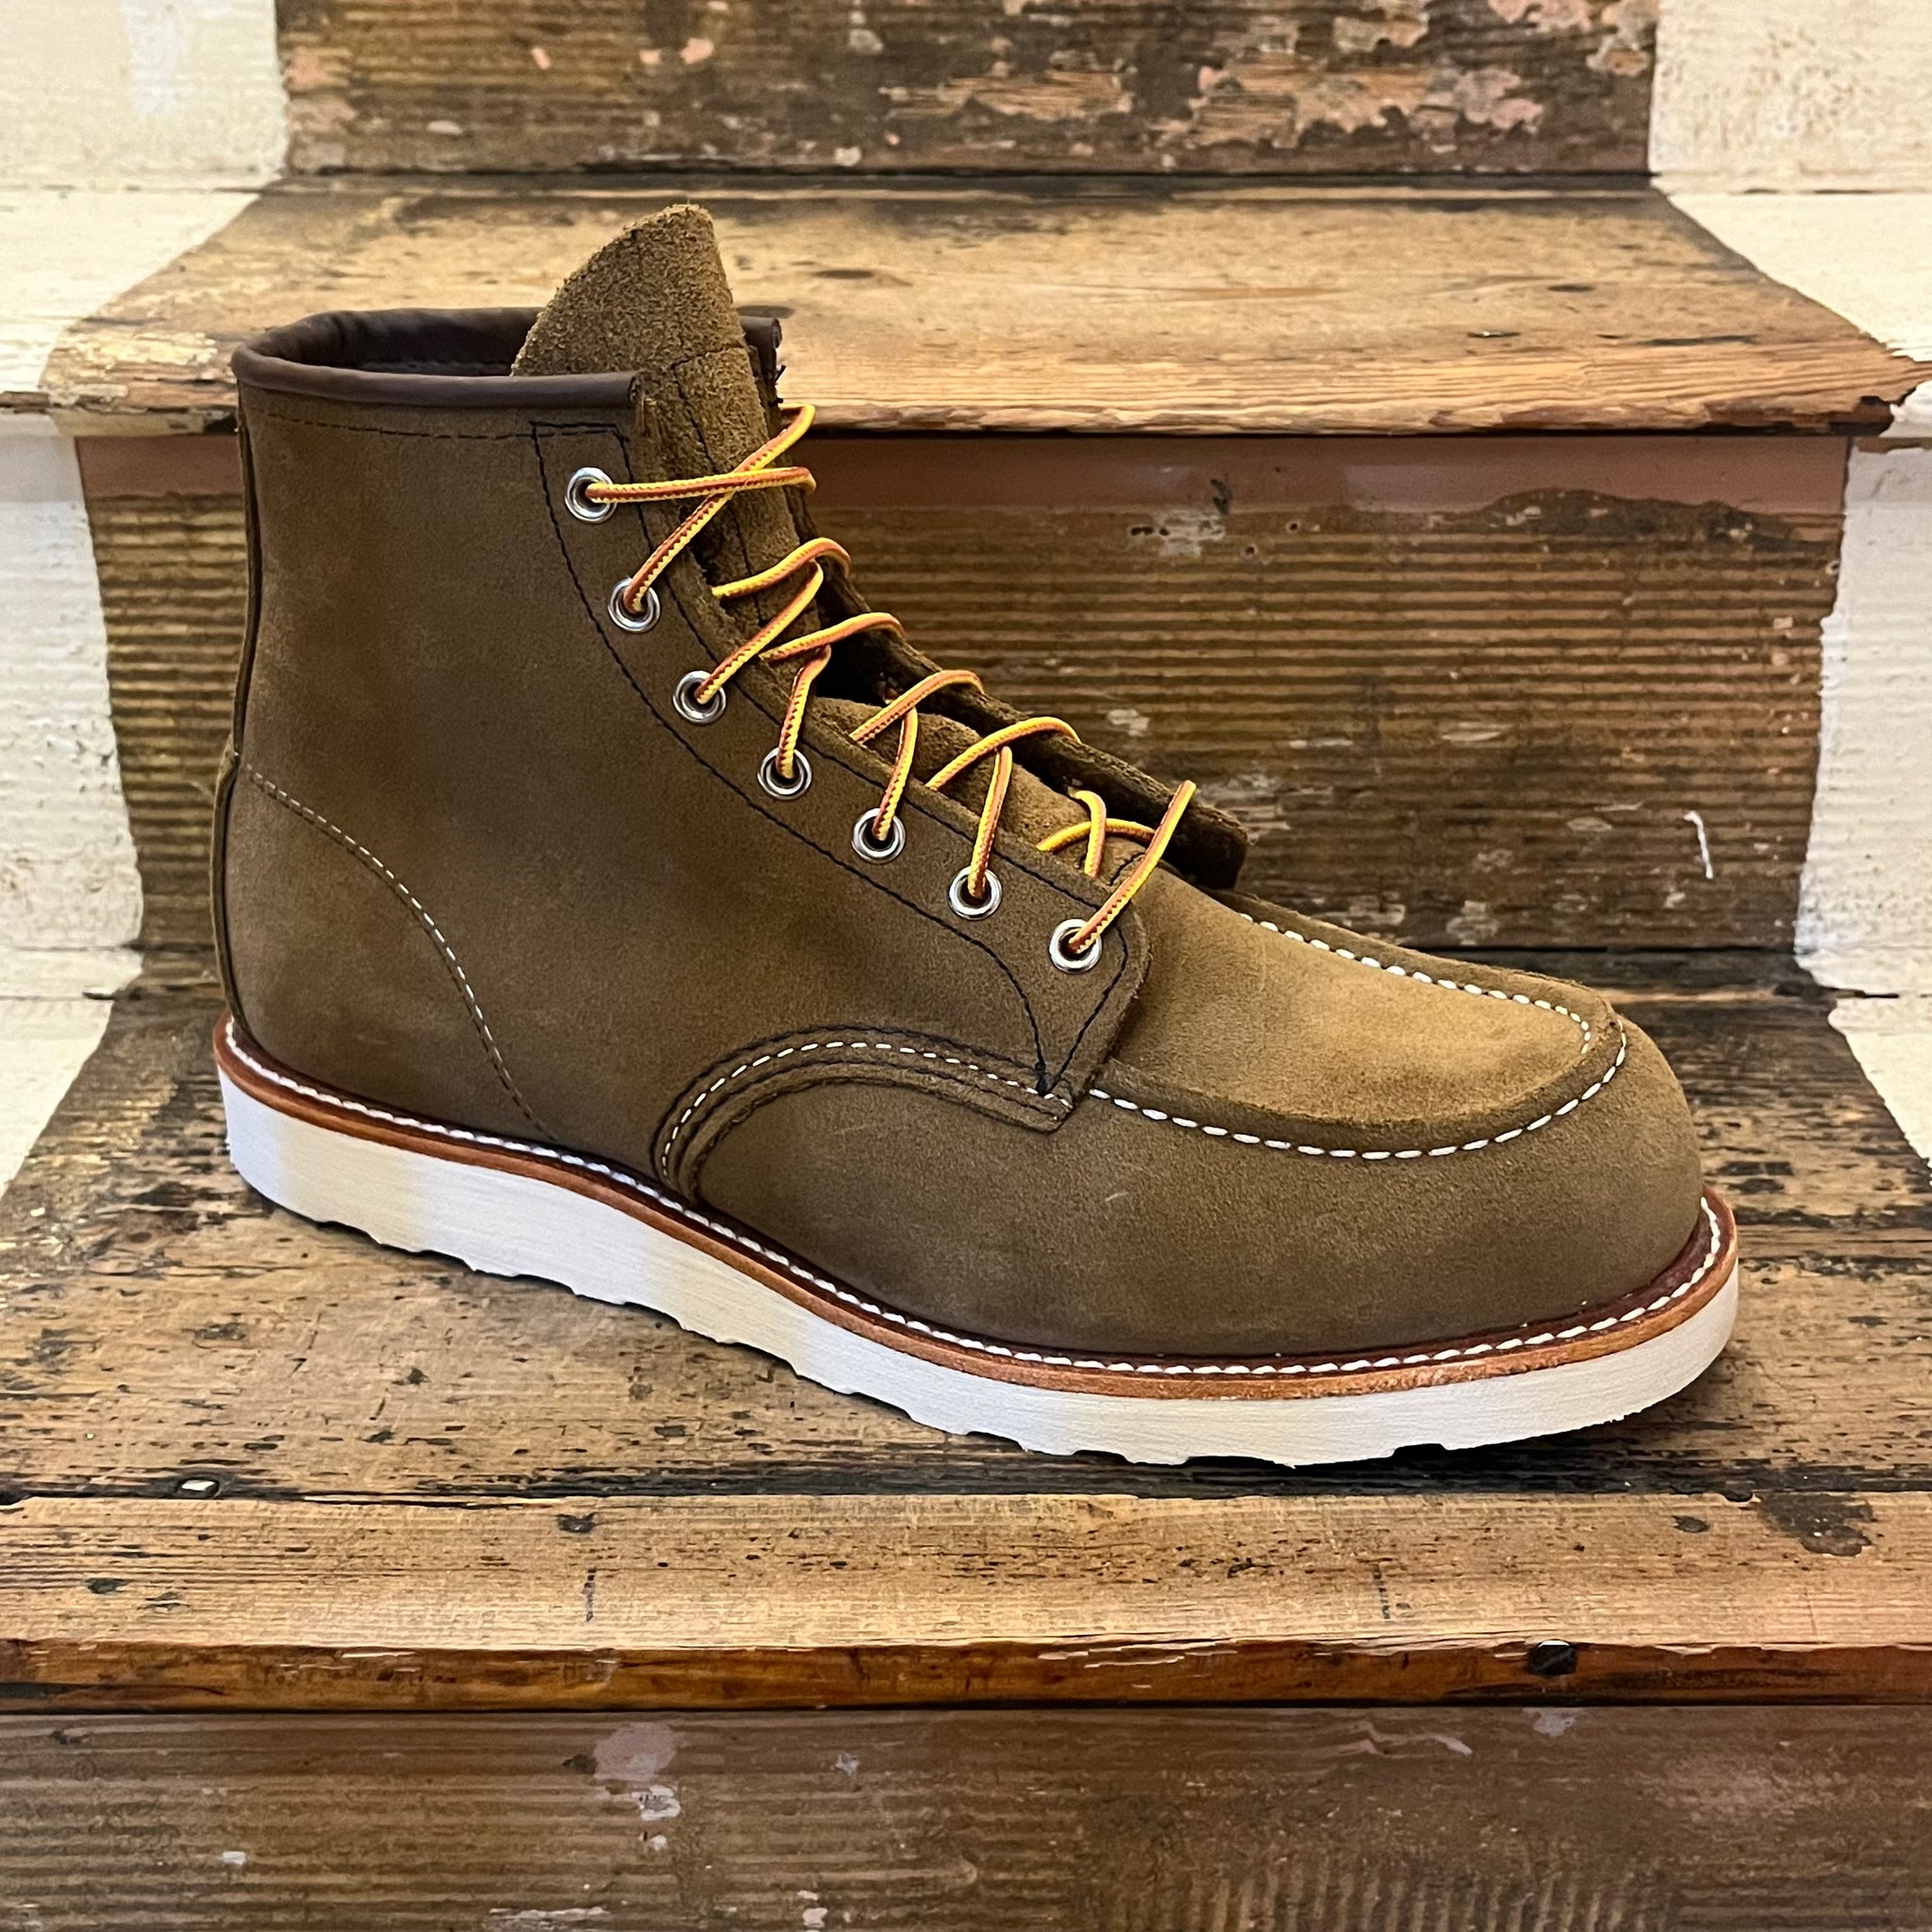 Red Wing moc toe boot in olive mohave suede leather